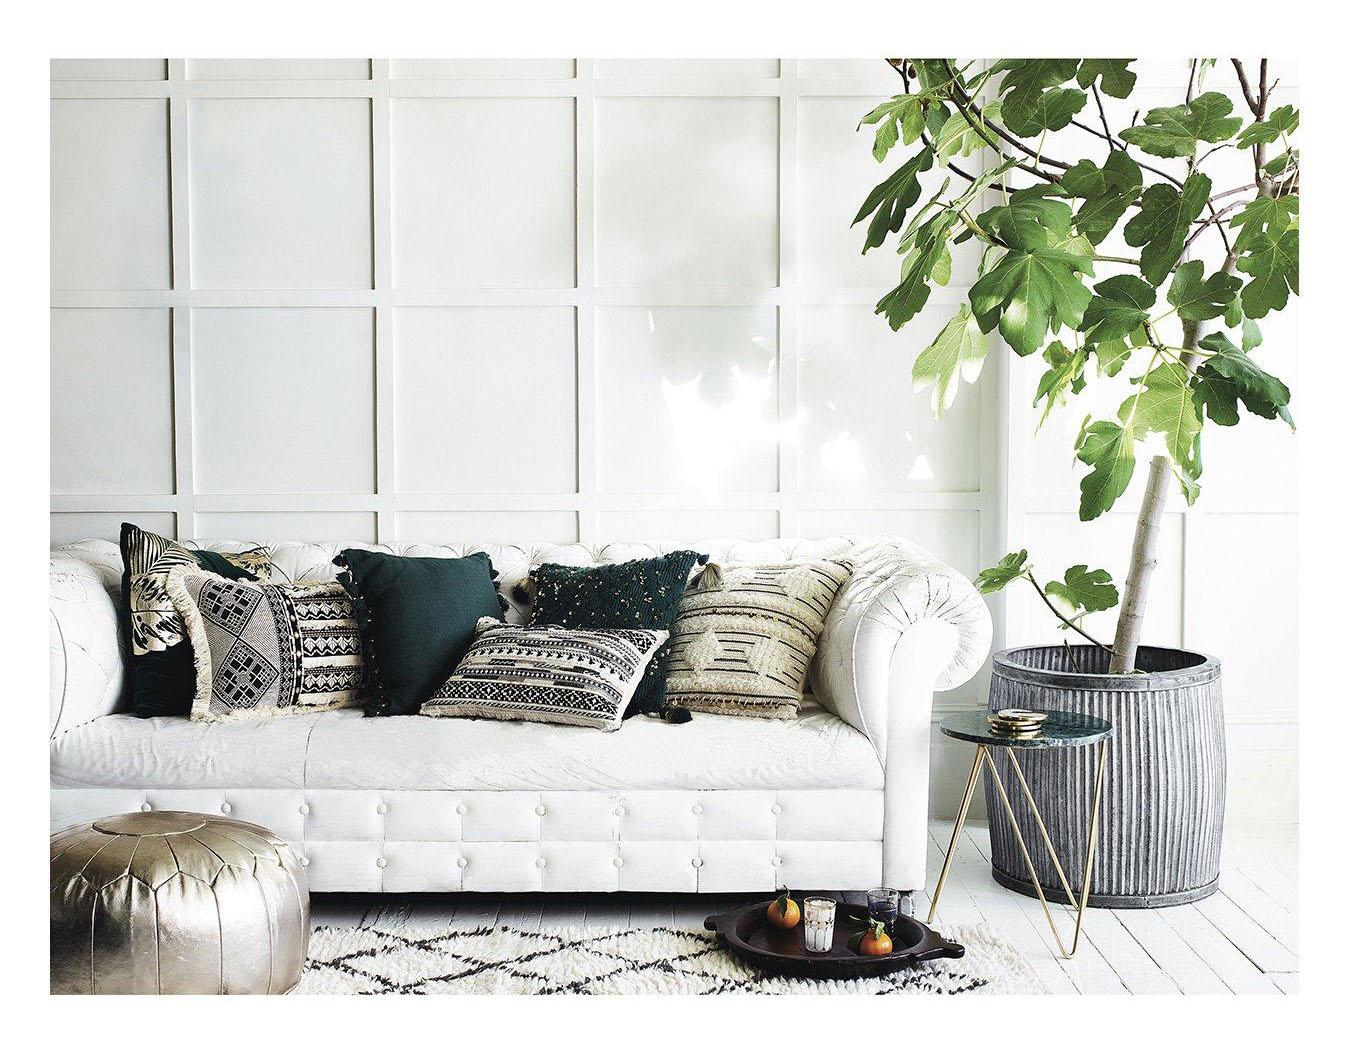 White, grey and green living room inspiration| Today we're talking inspiration for adding green to your living room. Green is a really versatile colour to decorate your home with. But, which colours and tones work well? What kind of accessories work with green? This post gives you ideas for pulling together an elegant green colour palette and pieces for your home. Read more: kittyandb.com #greenlivingroom #interiordecoratinginspiration #naturalaesthetic #whitesofa